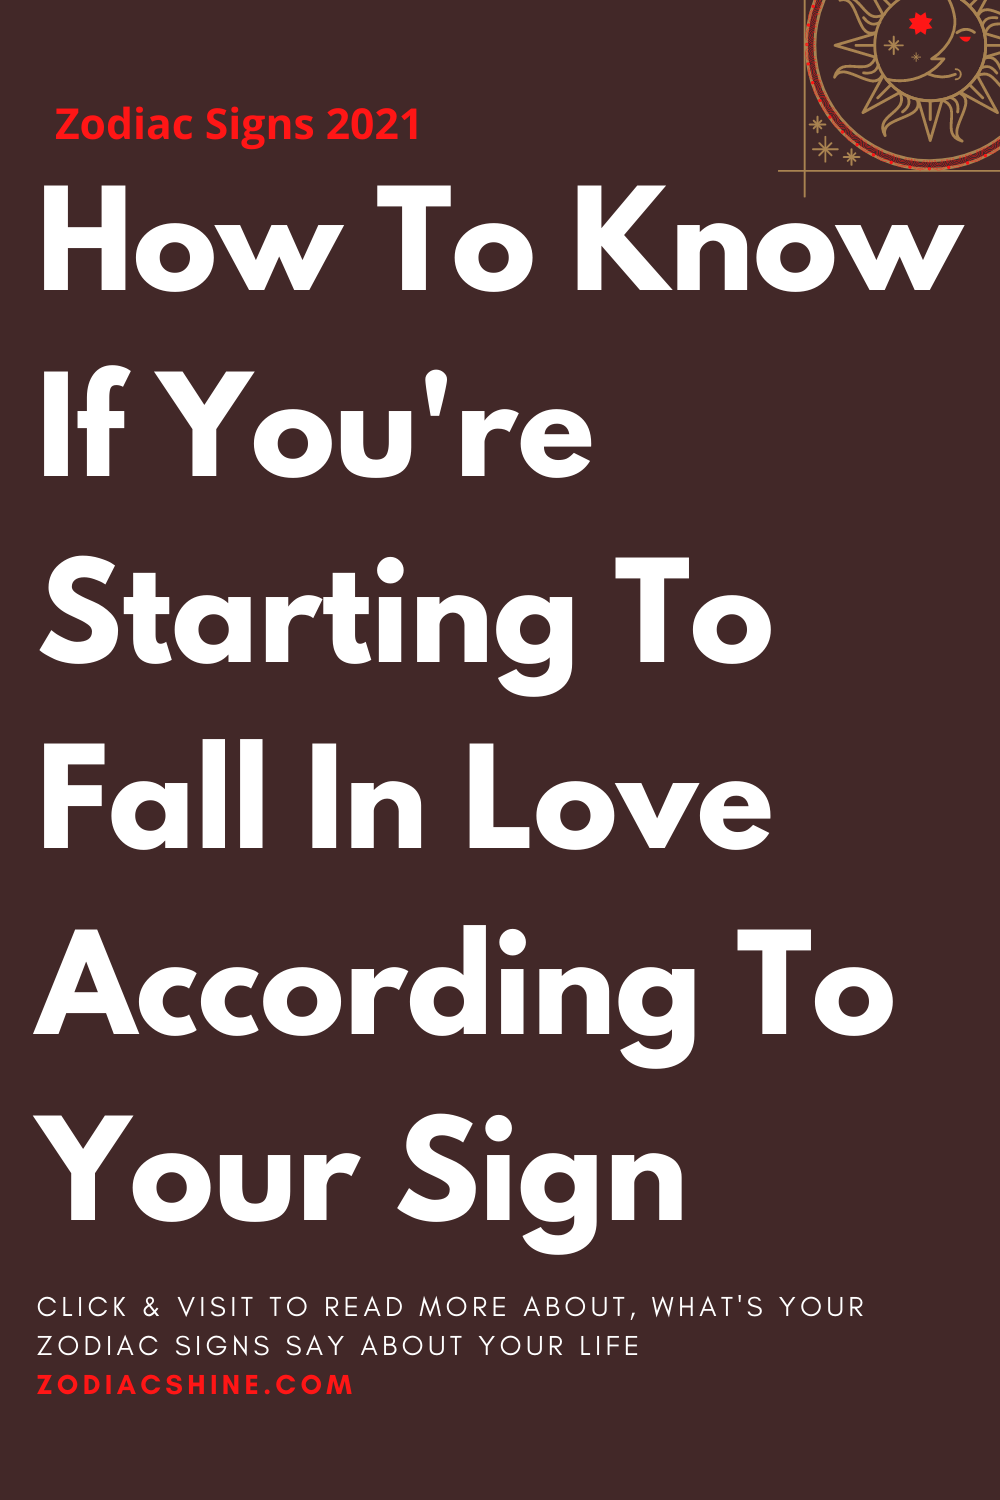 How To Know If You're Starting To Fall In Love According To Your Sign